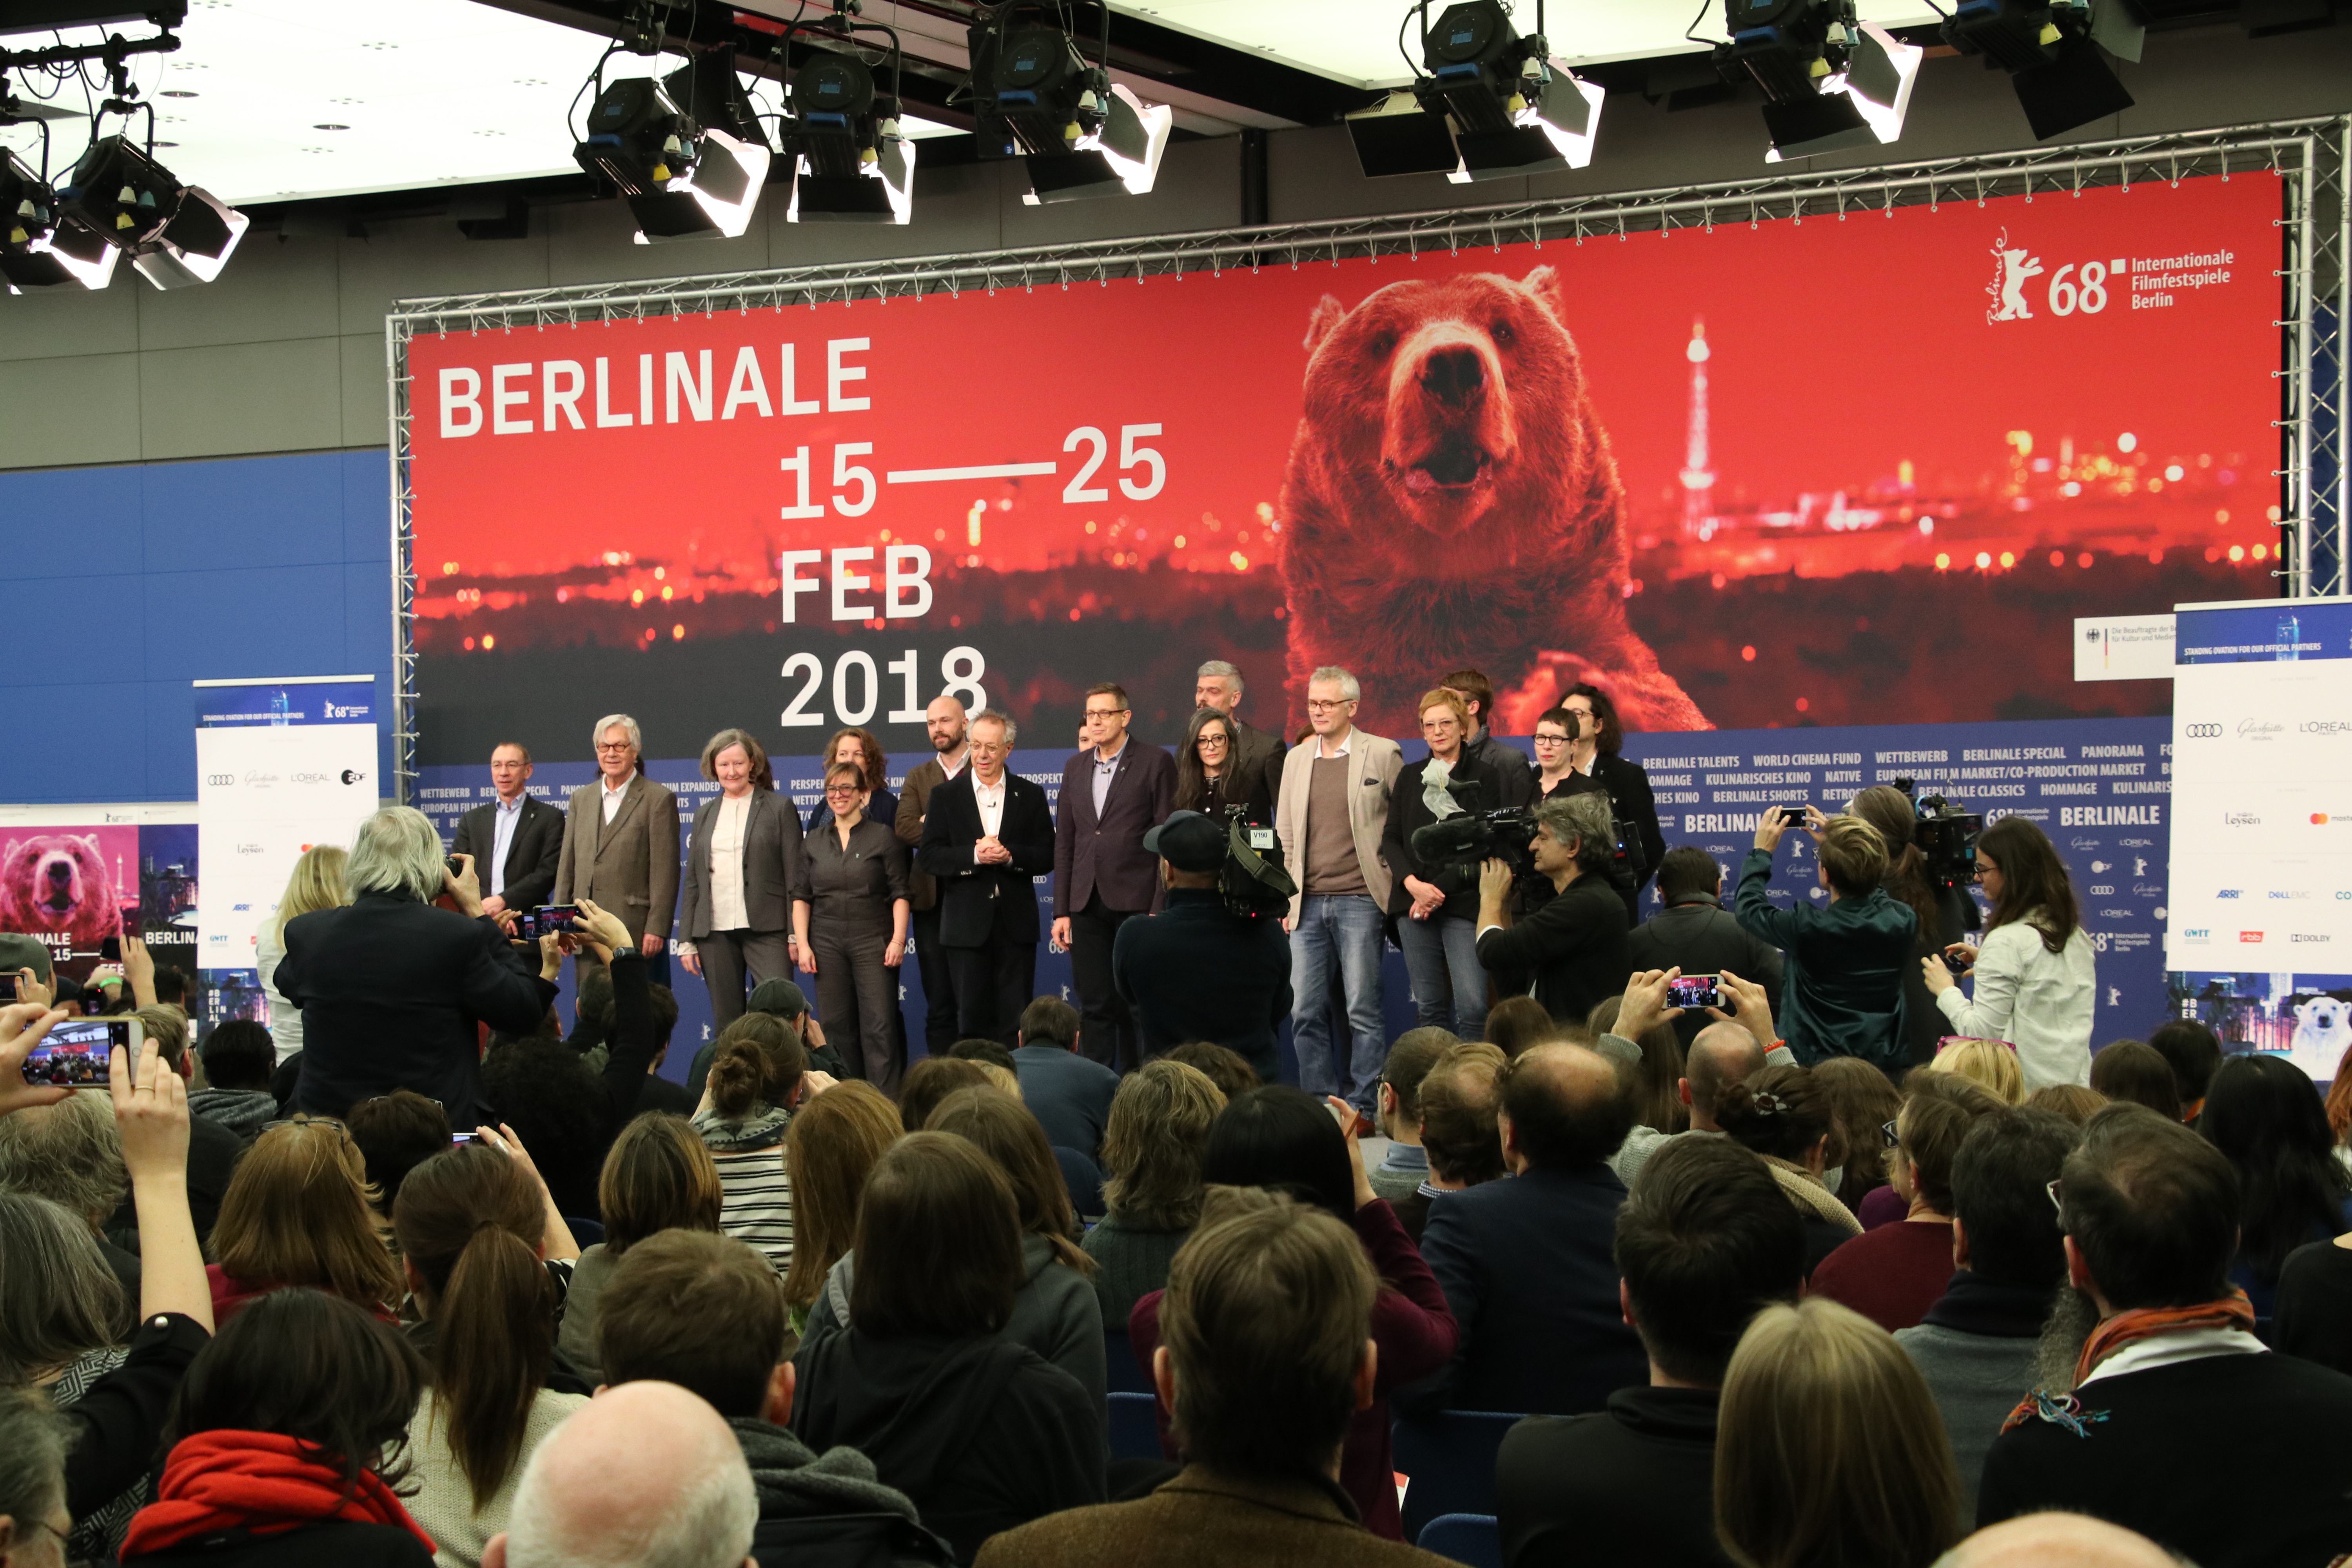 #ThisBerlinale18 Press Conference